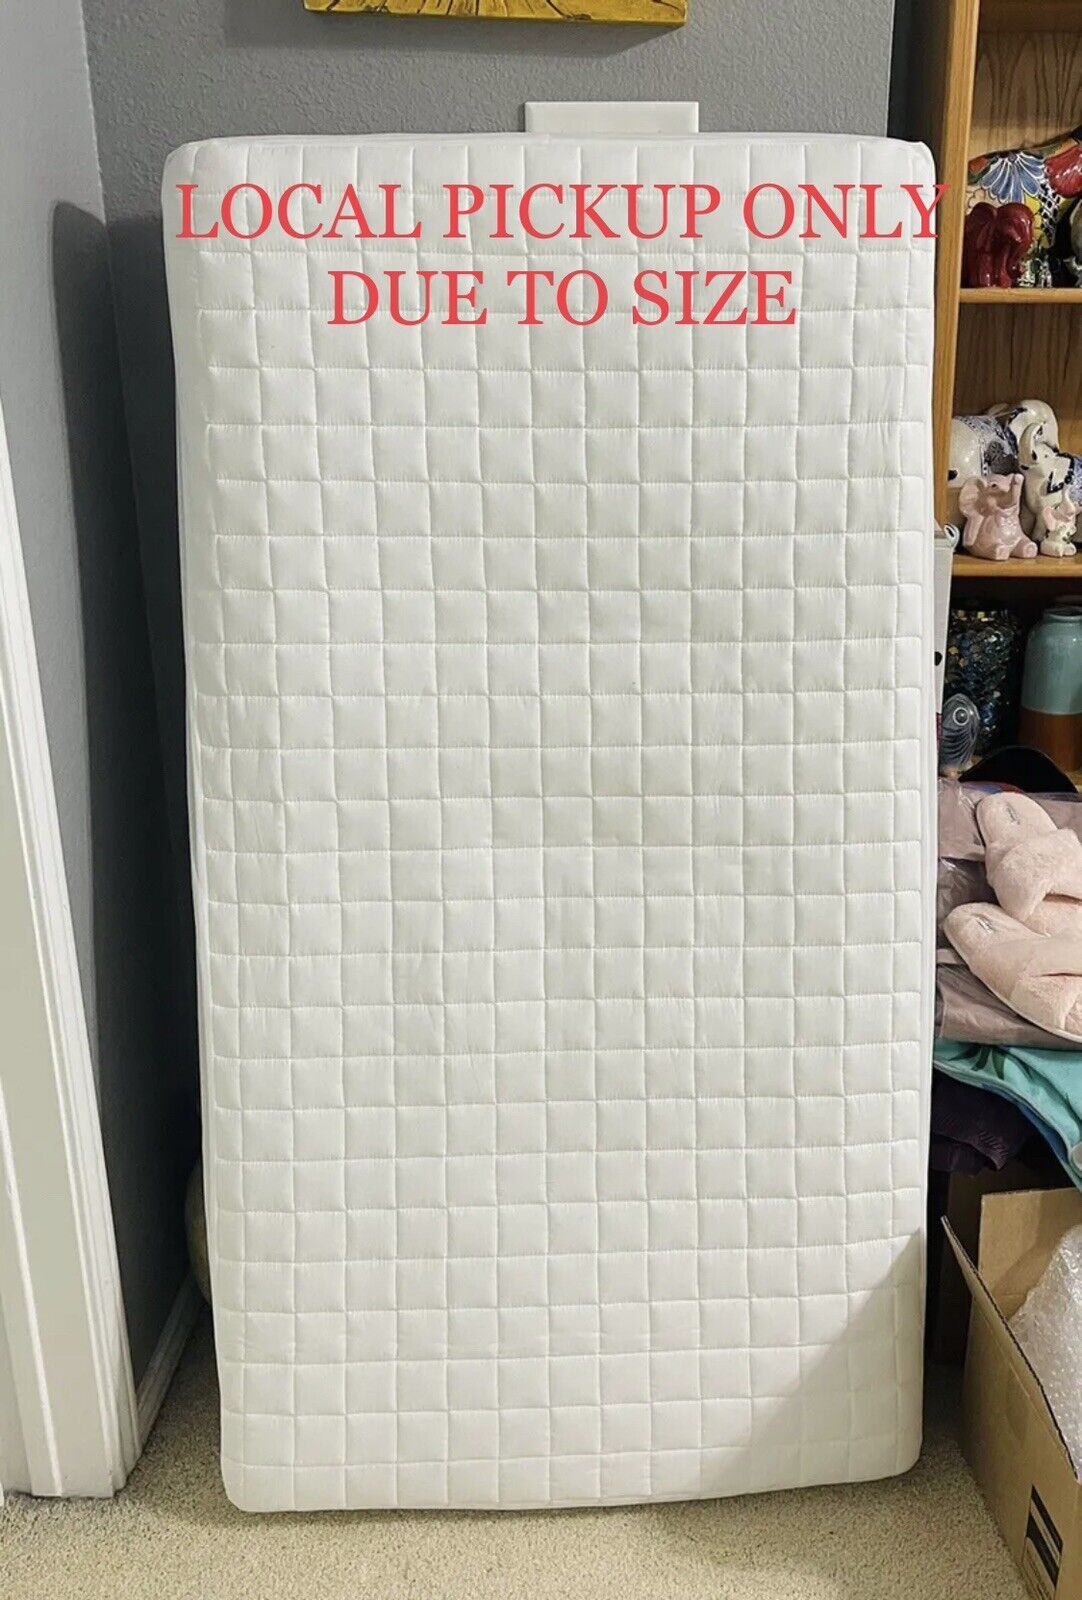 New, Never Used! Quilted Crib Mattress 27" W X 52" L